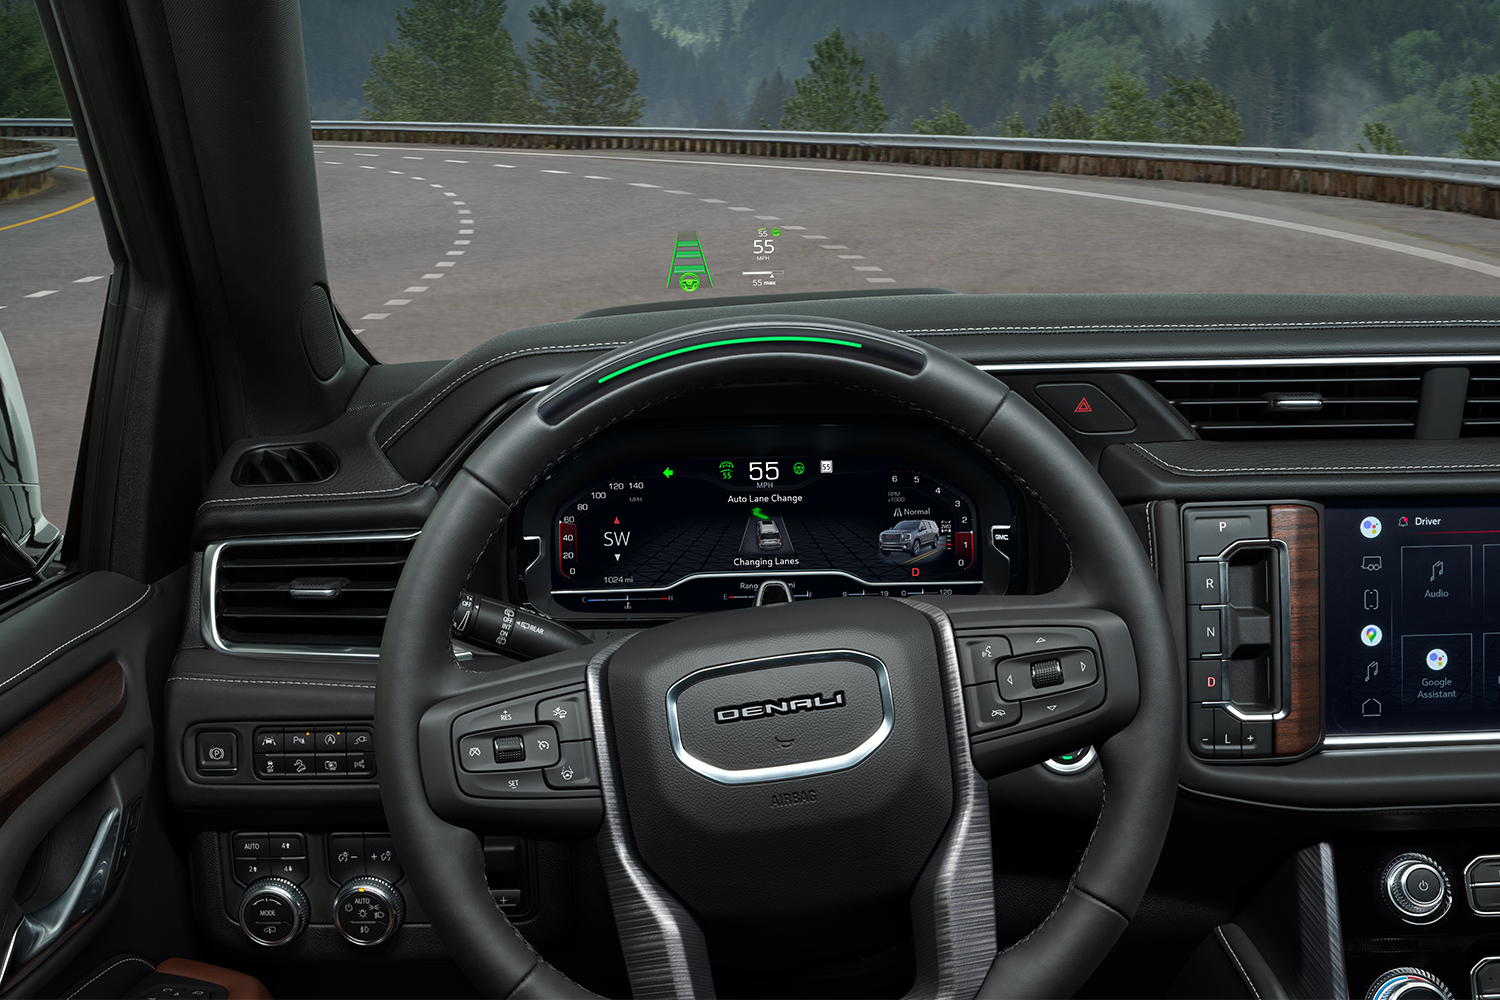 The automatic lane change functionality in GM Super Cruise